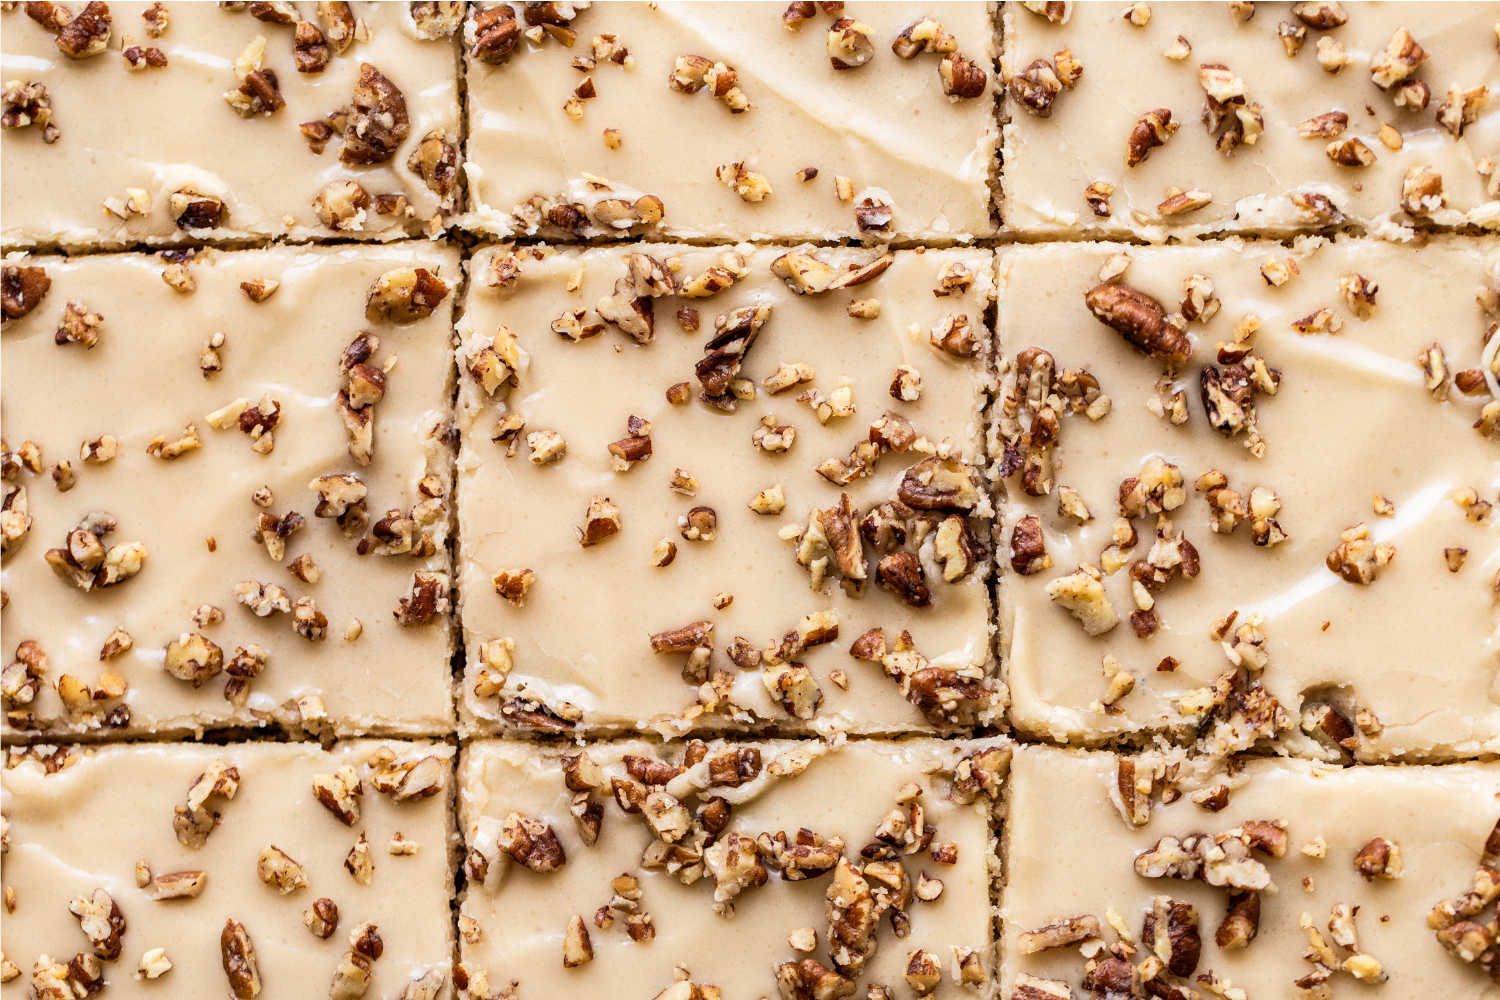 iced cake topped with buttery pecan pieces, sliced up.